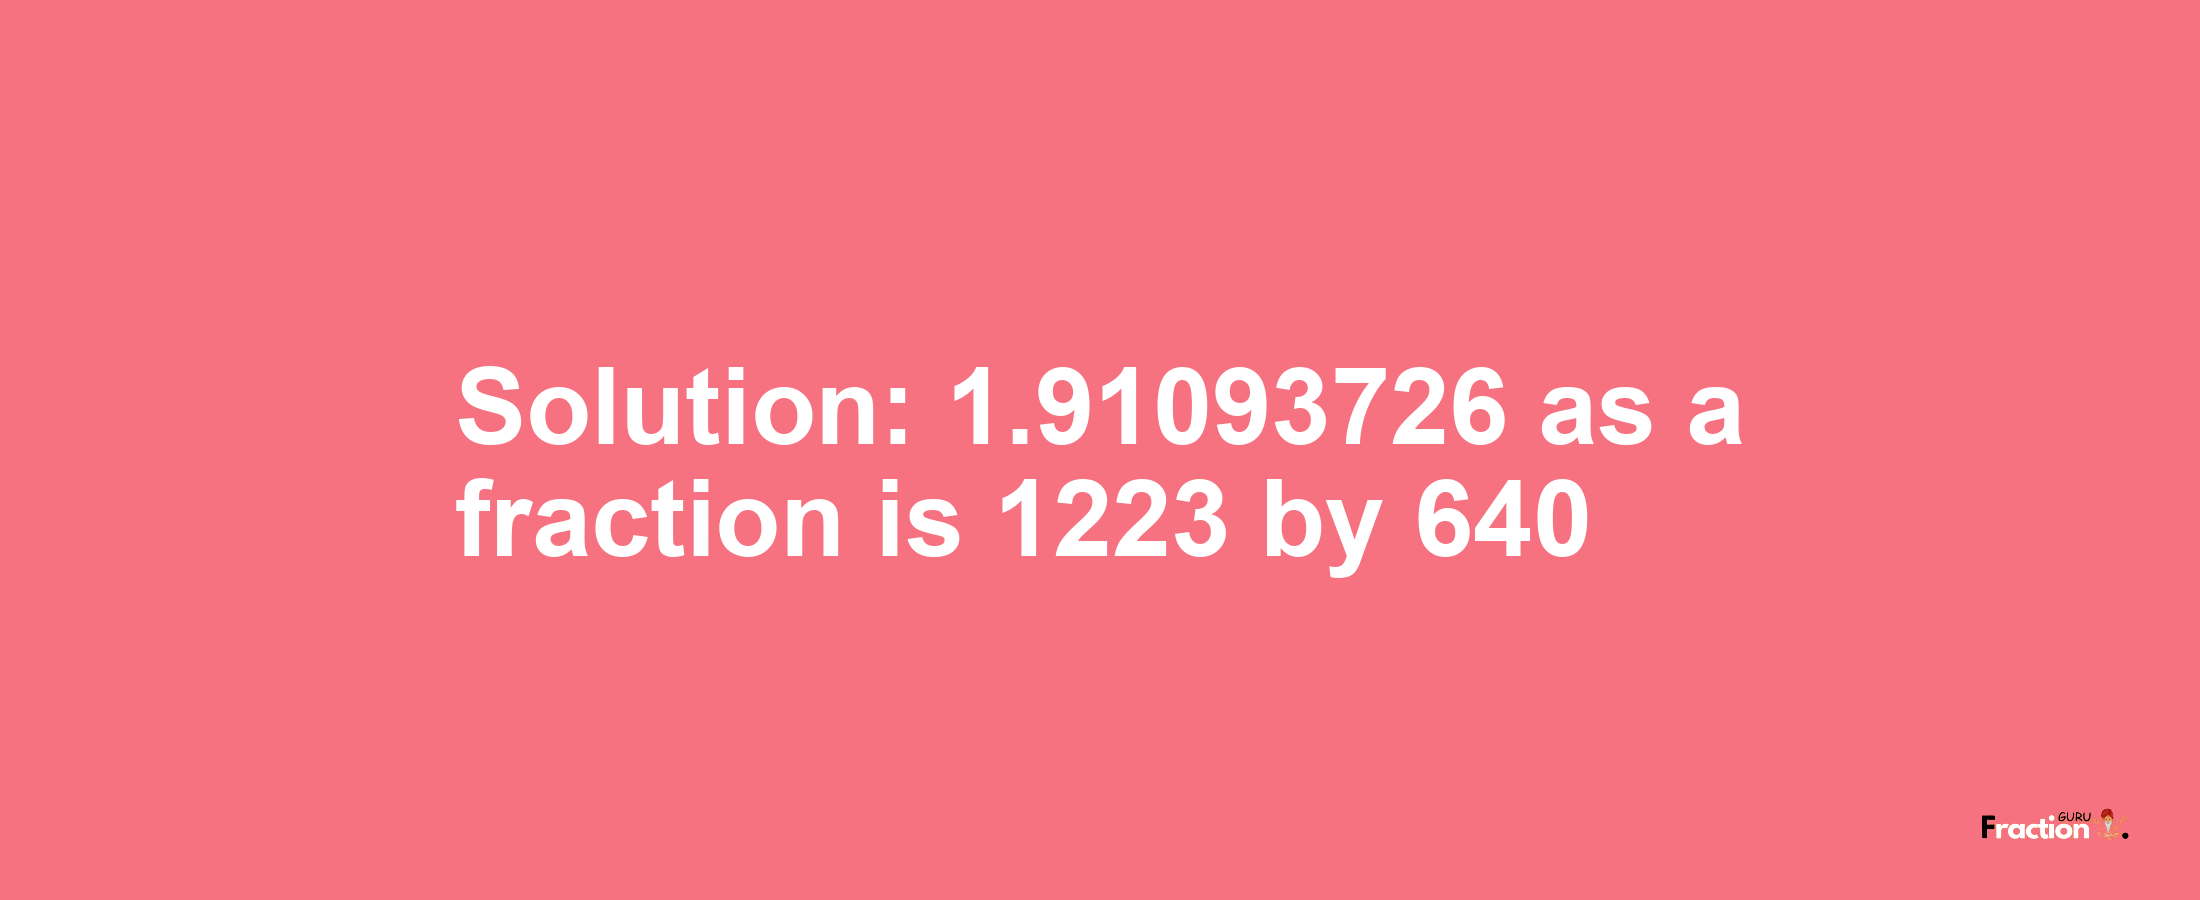 Solution:1.91093726 as a fraction is 1223/640